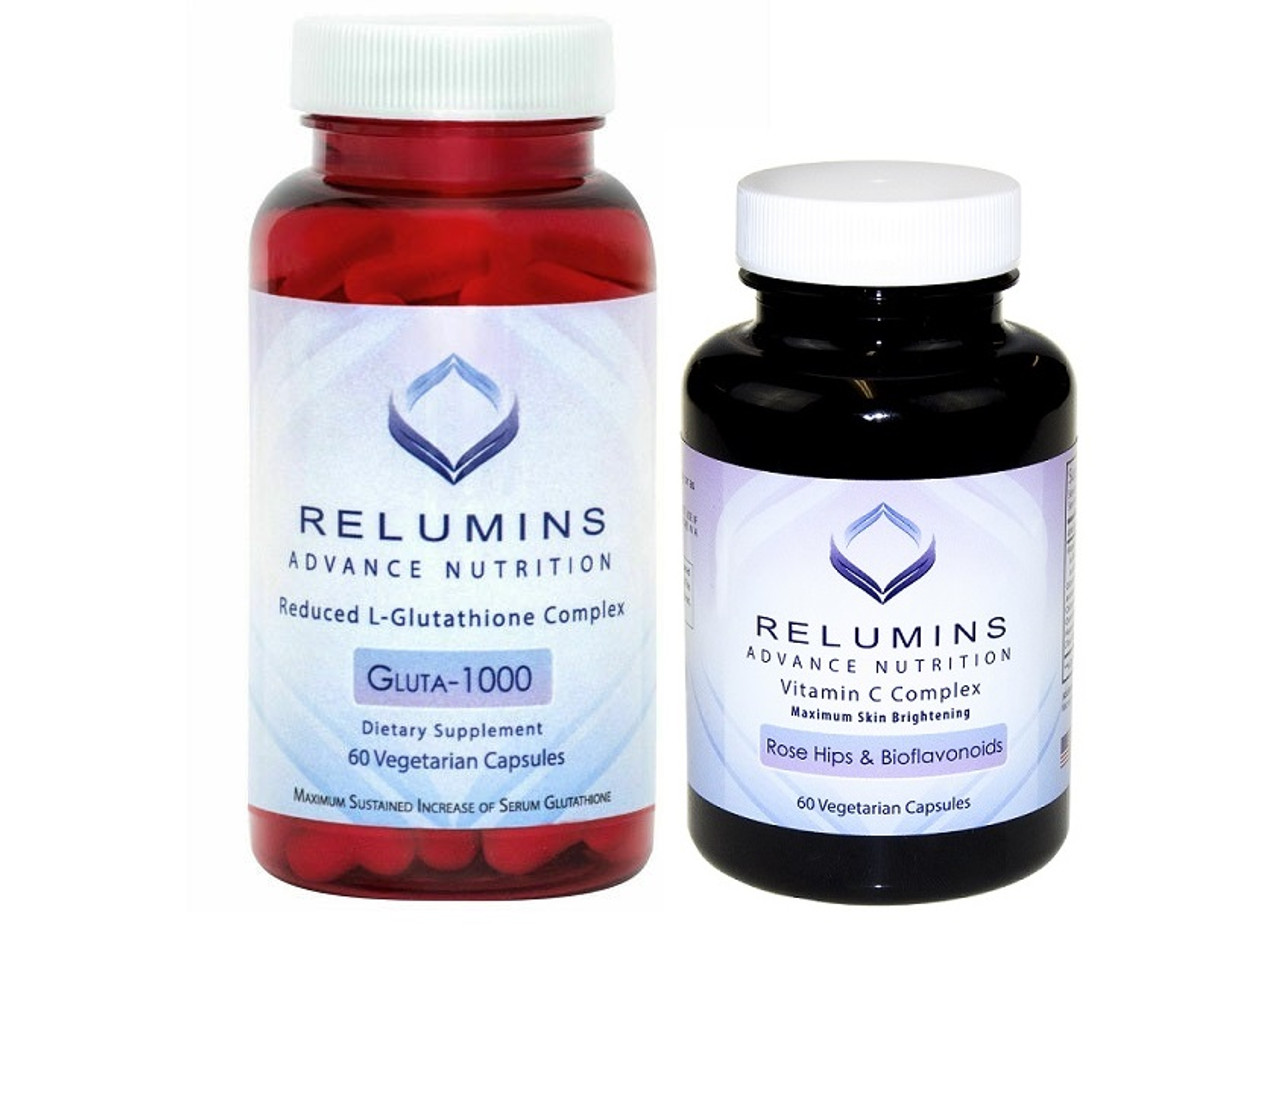 RELUMINS  ADVANCE NUTRITION 1000 Reduced L - Glutathione Skin Whitening with RELUMINS Vitamin C 60 Capsules